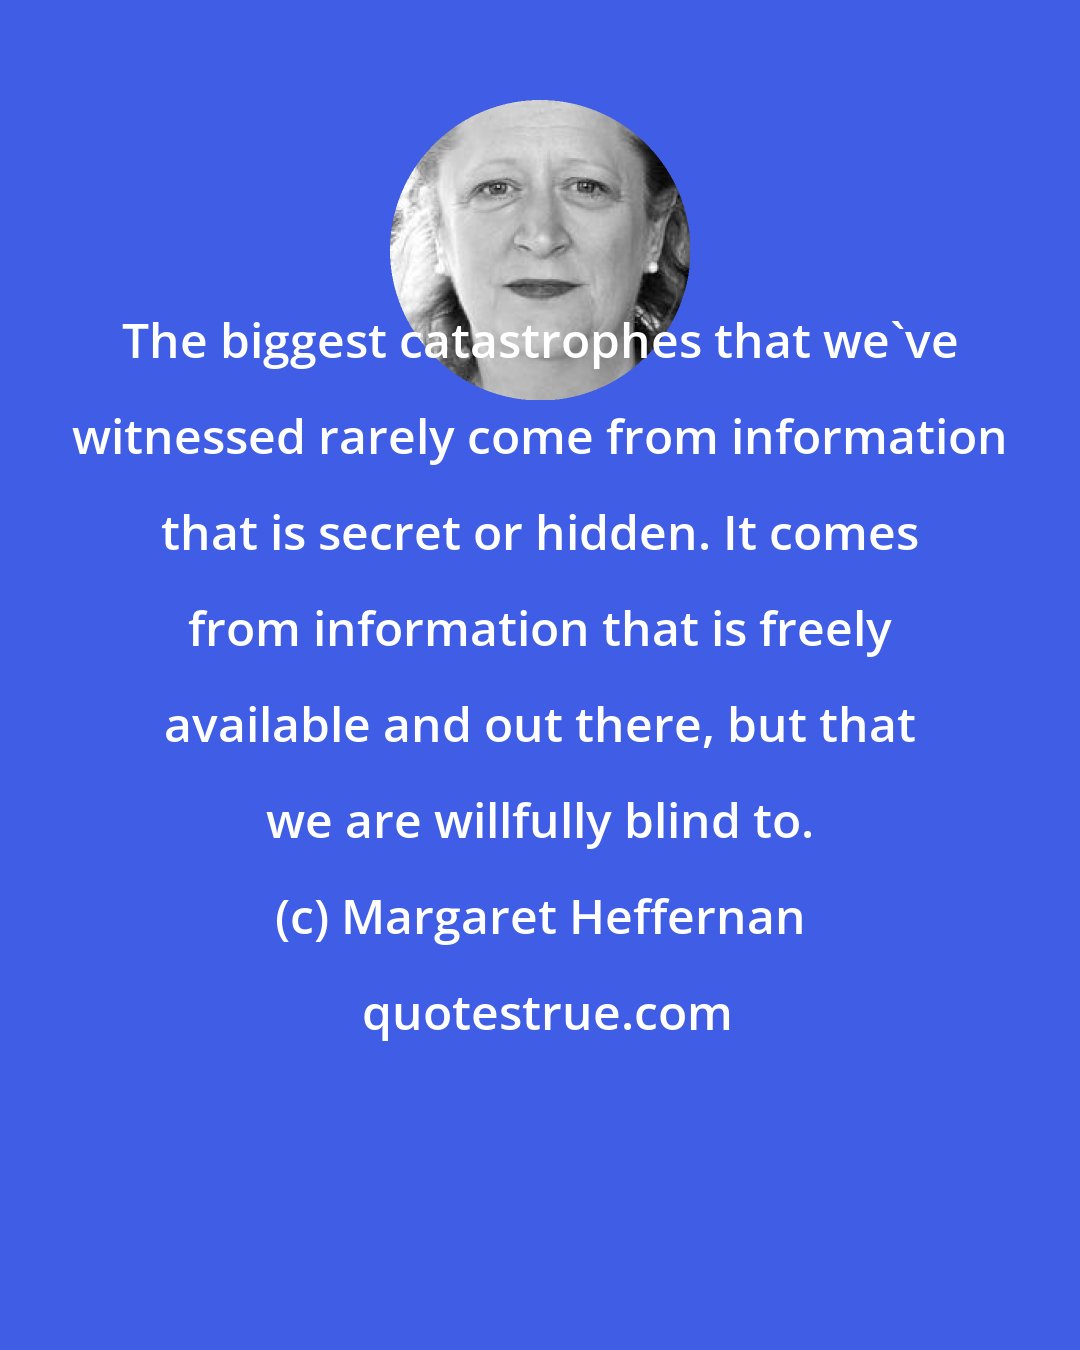 Margaret Heffernan: The biggest catastrophes that we've witnessed rarely come from information that is secret or hidden. It comes from information that is freely available and out there, but that we are willfully blind to.